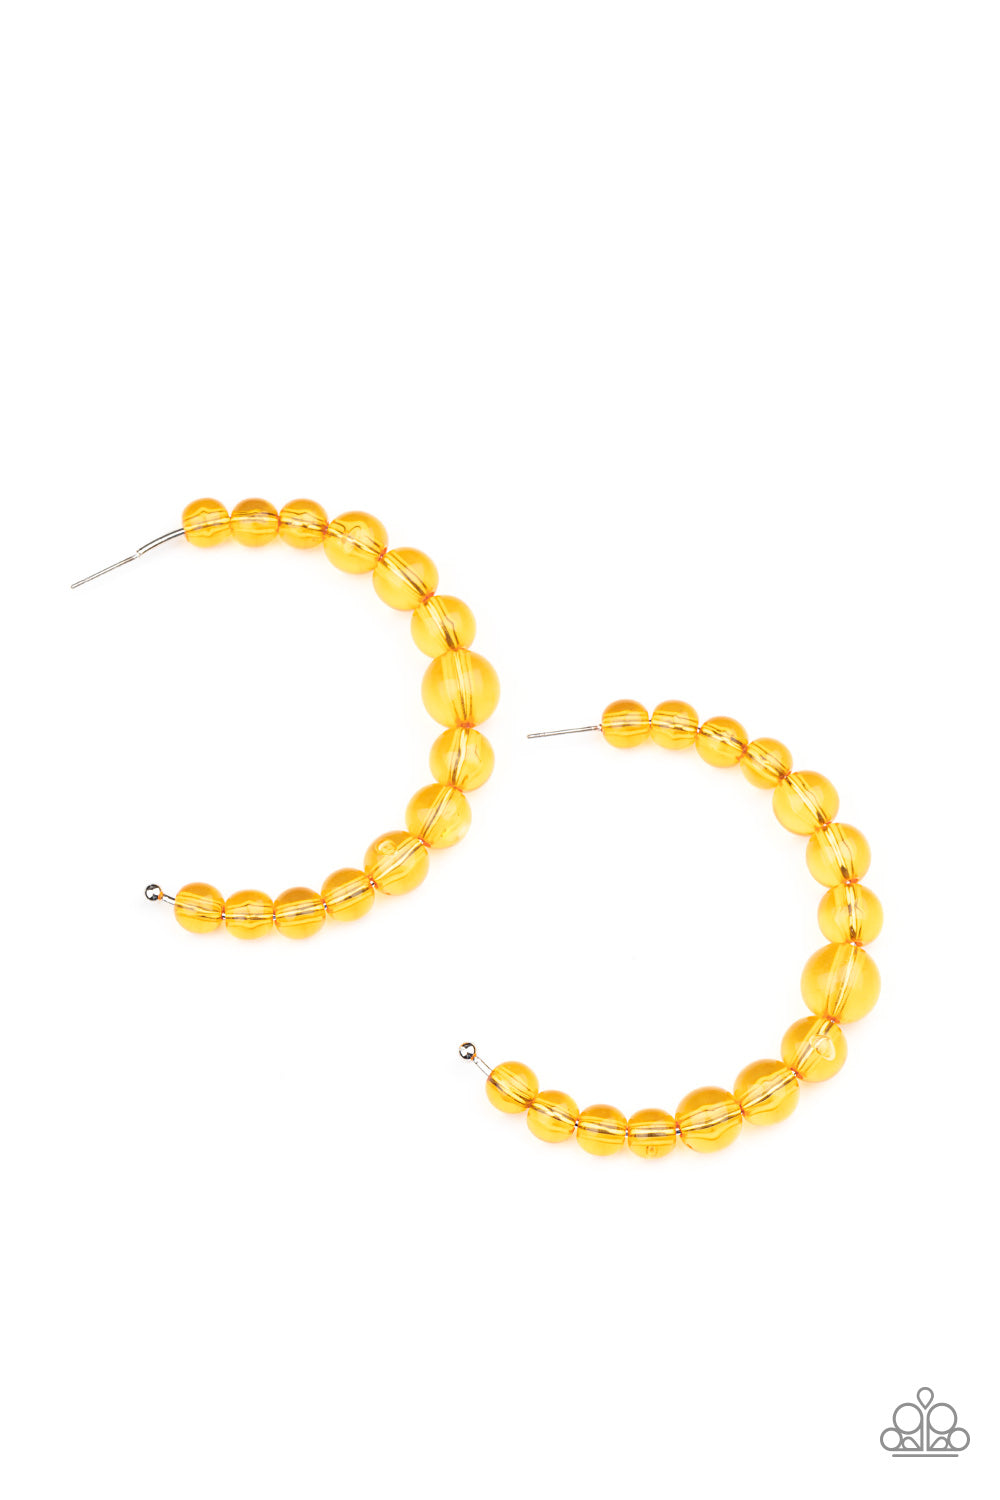 In The Clear Orange Hoop Earring - Paparazzi Accessories  Gradually increasing in size at the center, a glassy collection of Marigold beads are threaded along an oversized hoop for a bubbly effect. Earring attaches to a stand post fitting. Hoop measures approximately 2 1/2" in diameter.  All Paparazzi Accessories are lead free and nickel free!  Sold as one pair of hoop earrings.